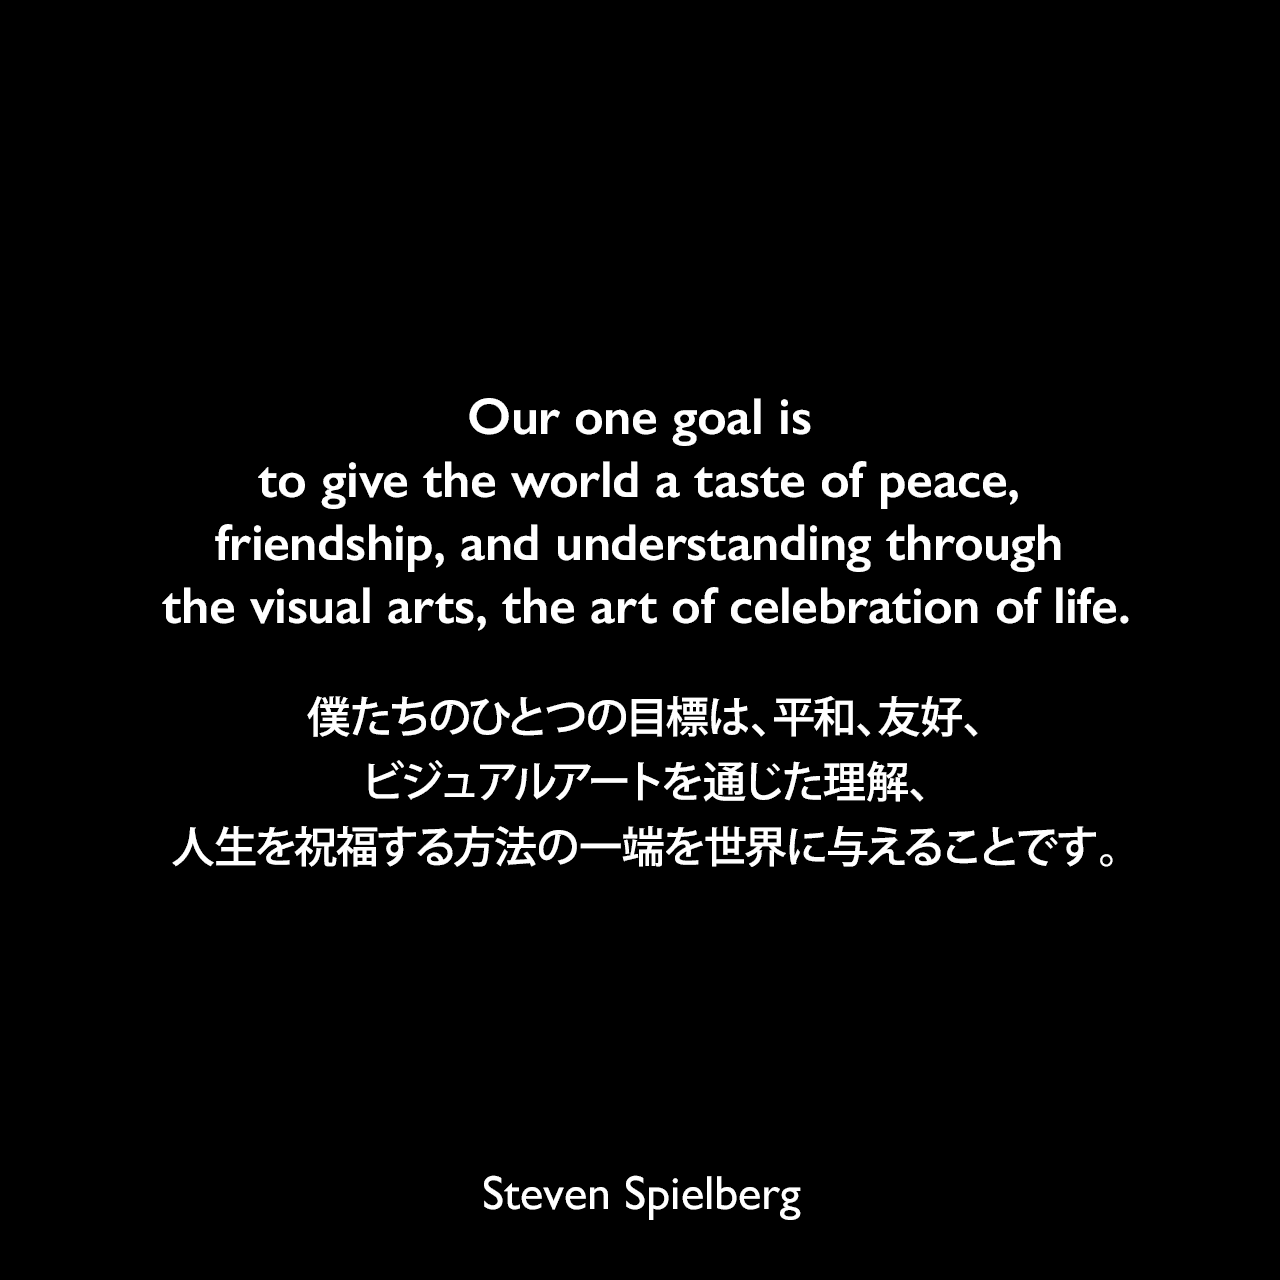 Our one goal is to give the world a taste of peace, friendship, and understanding through the visual arts, the art of celebration of life.僕たちのひとつの目標は、平和、友好、ビジュアルアートを通じた理解、人生を祝福する方法の一端を世界に与えることです。Steven Spielberg